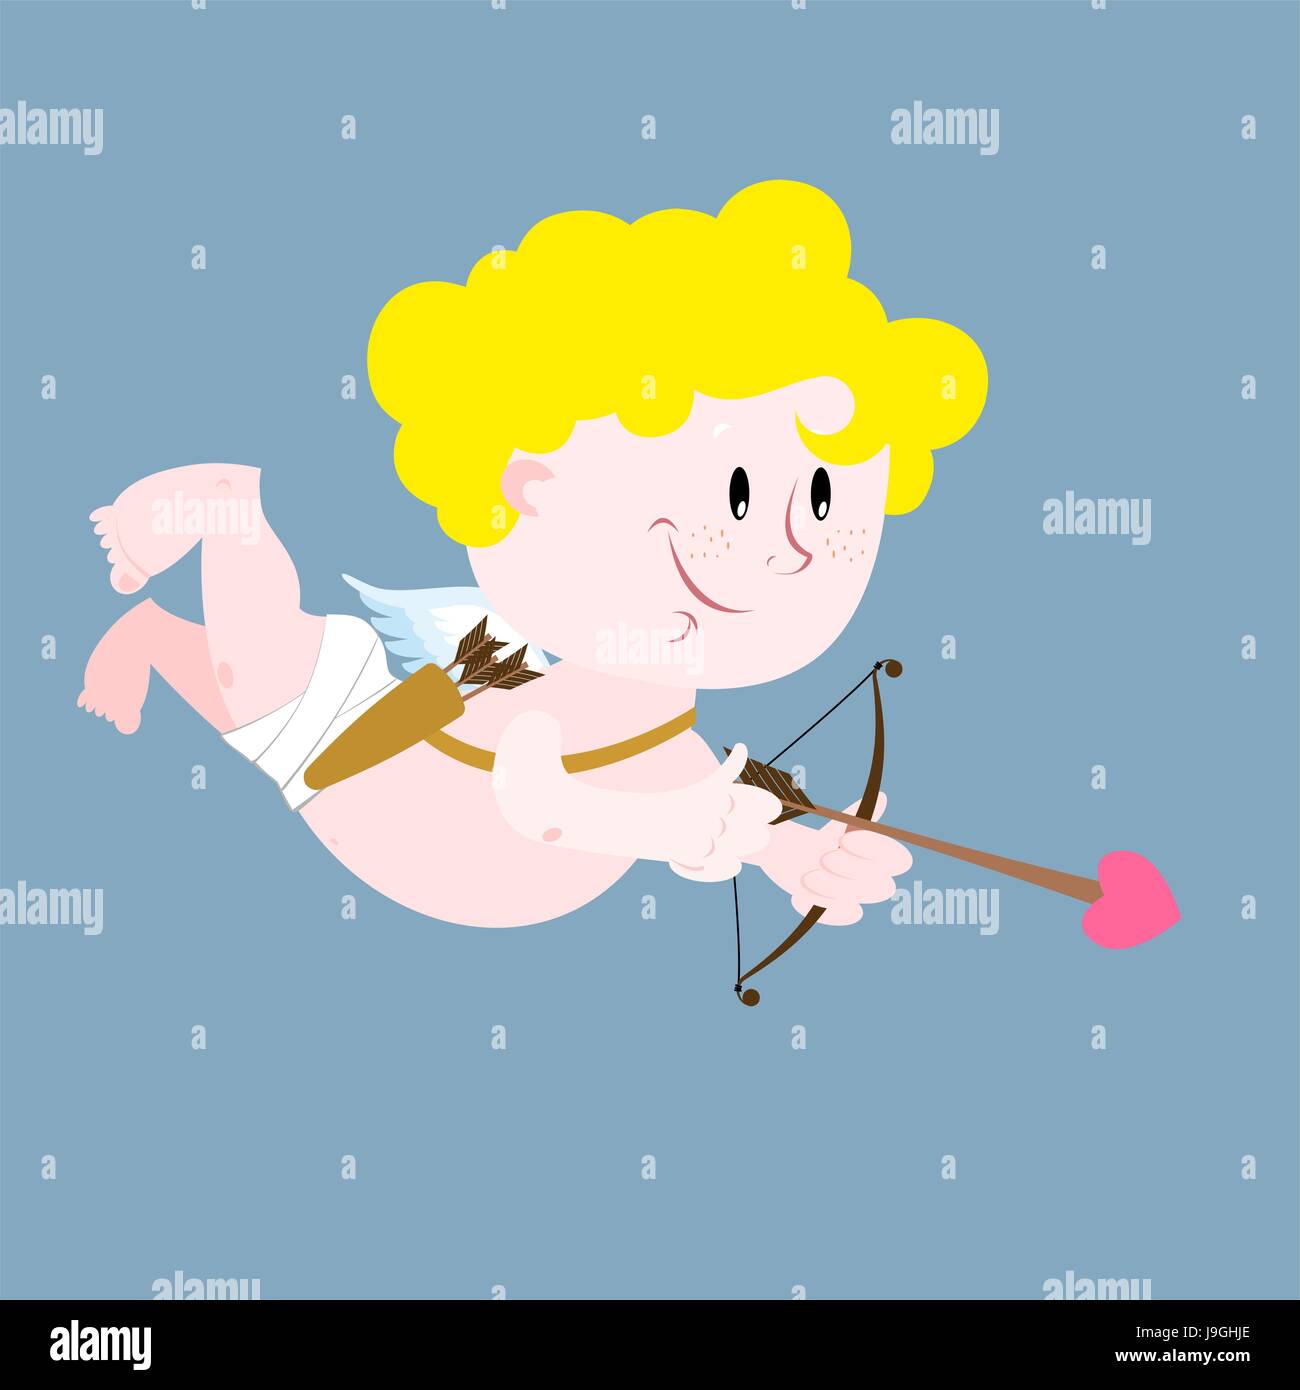 Cupid Angel of love. Little Cupid with wings. Cute Angel with golden hair. Bow and arrow. Arrow of love. Illustration for Valentine's day. Stock Vector